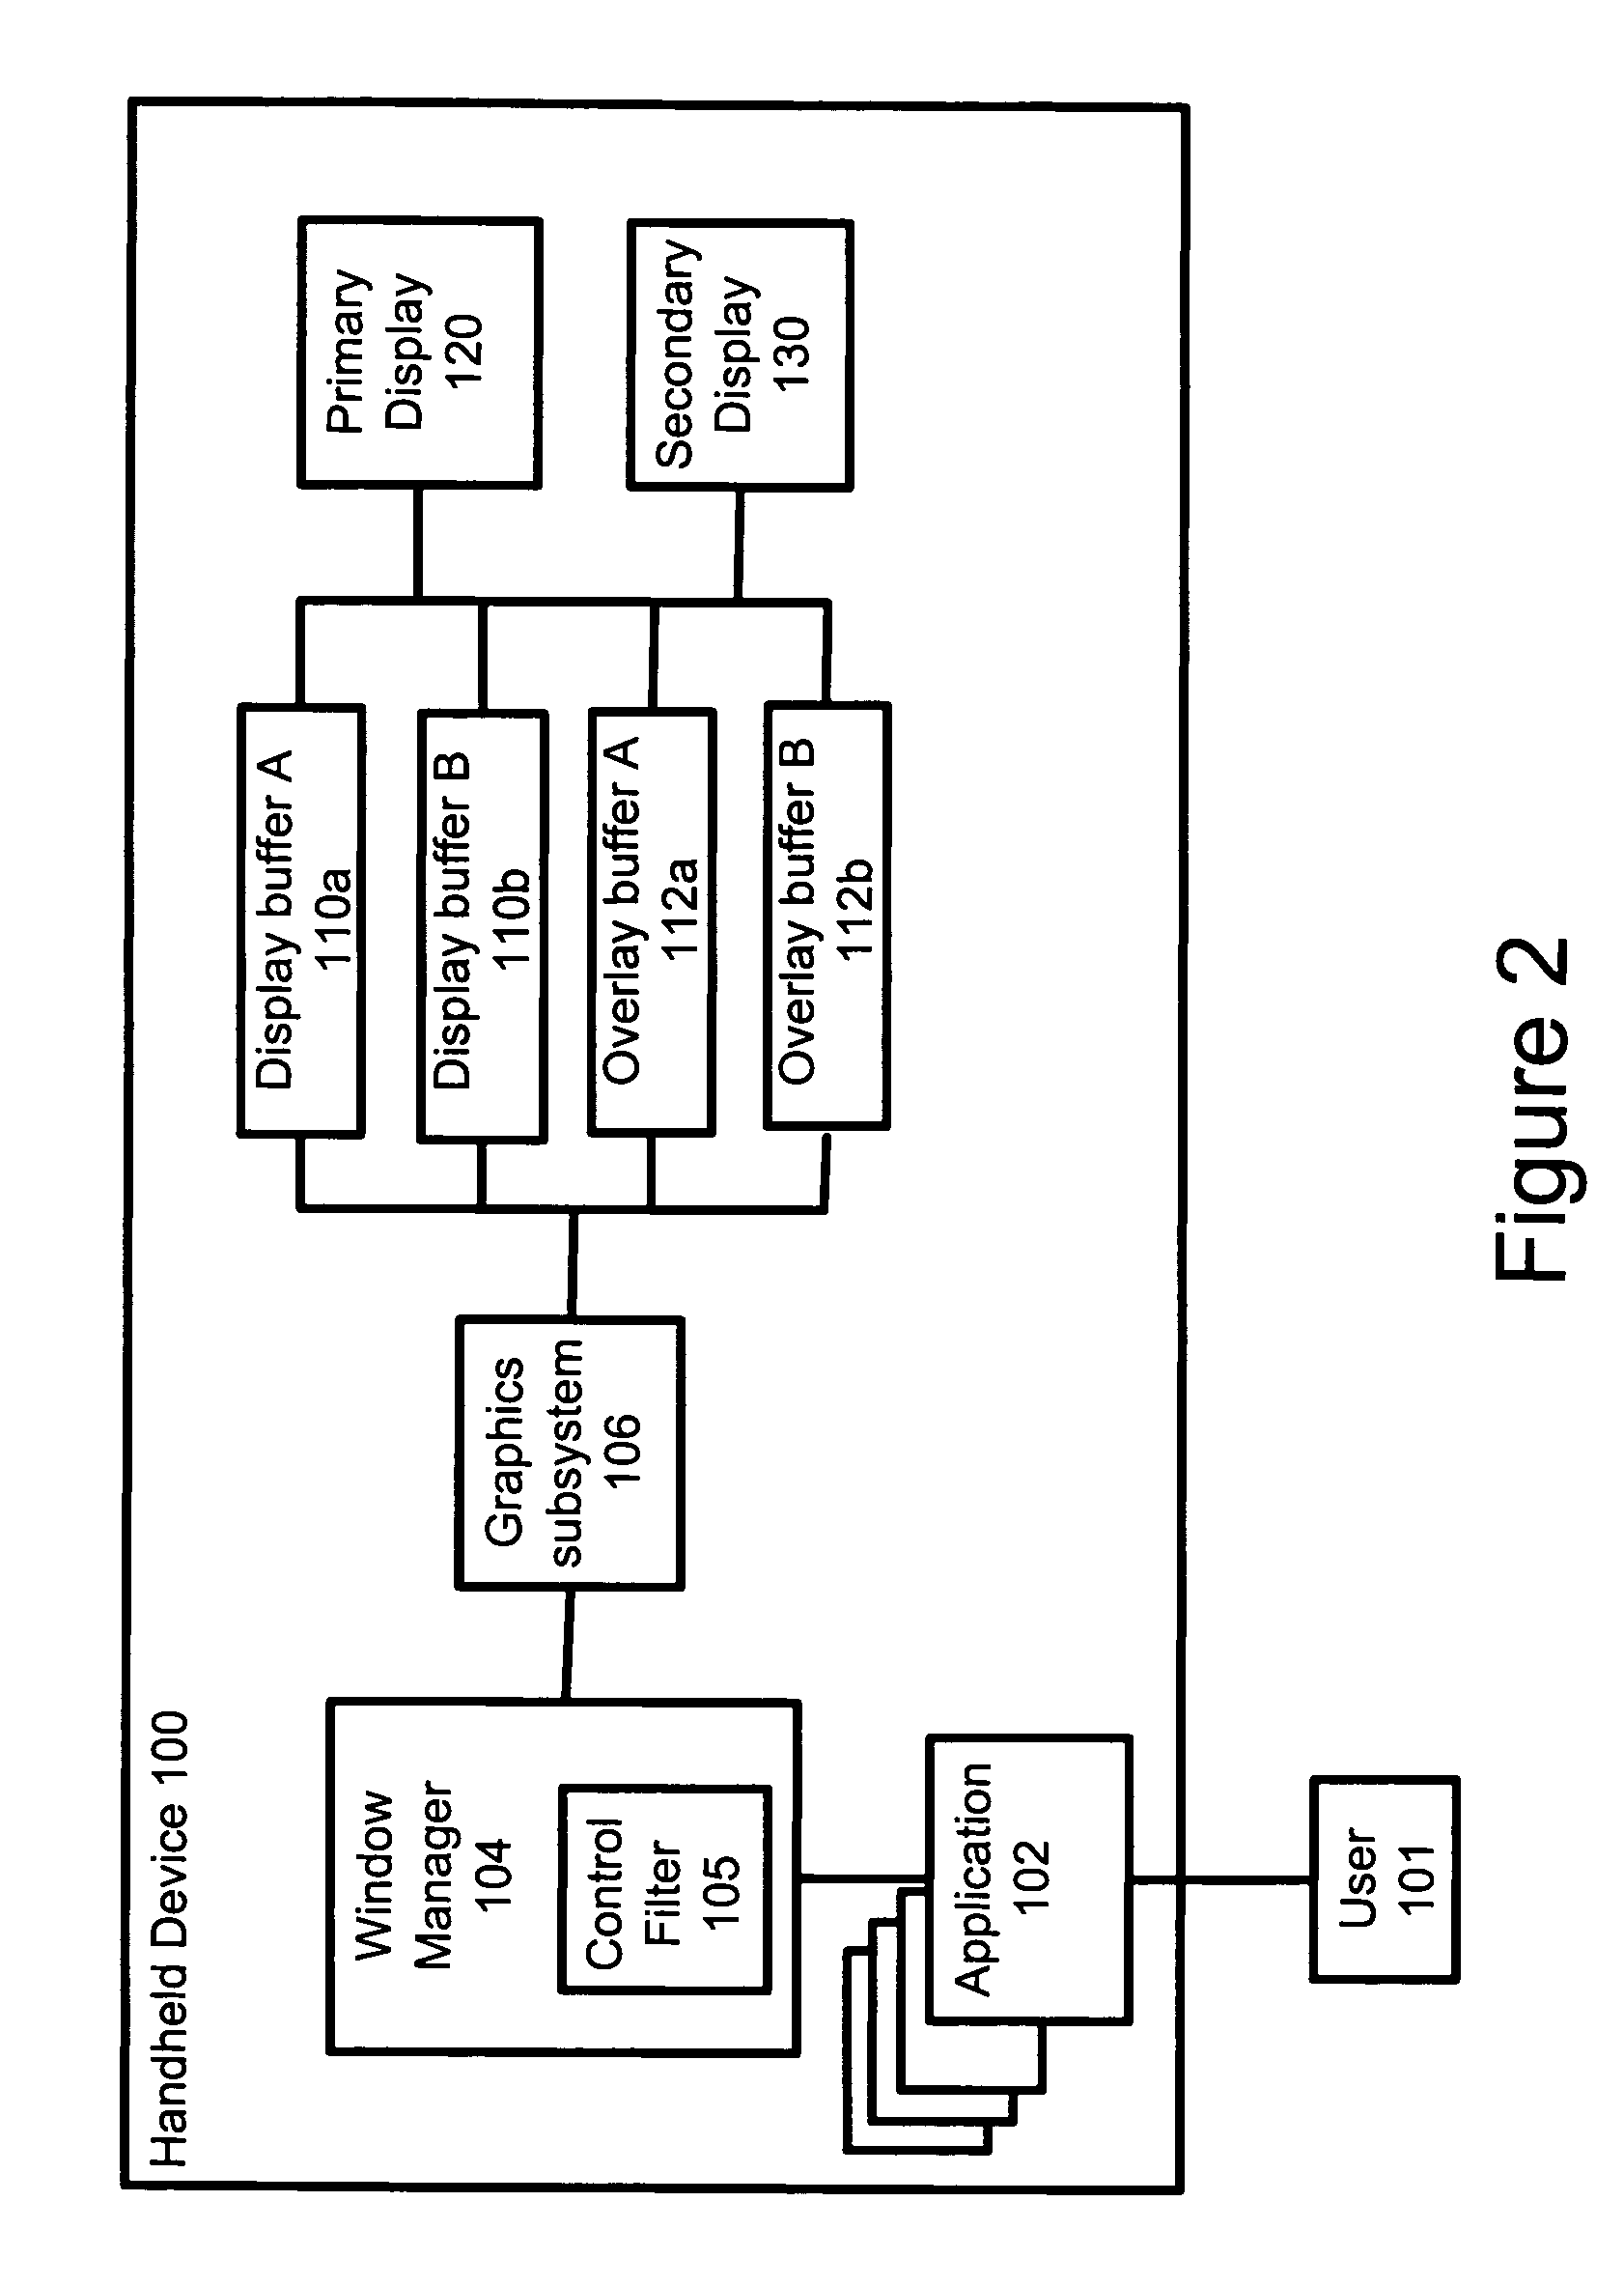 Handheld electronic device supporting multiple display mechanisms